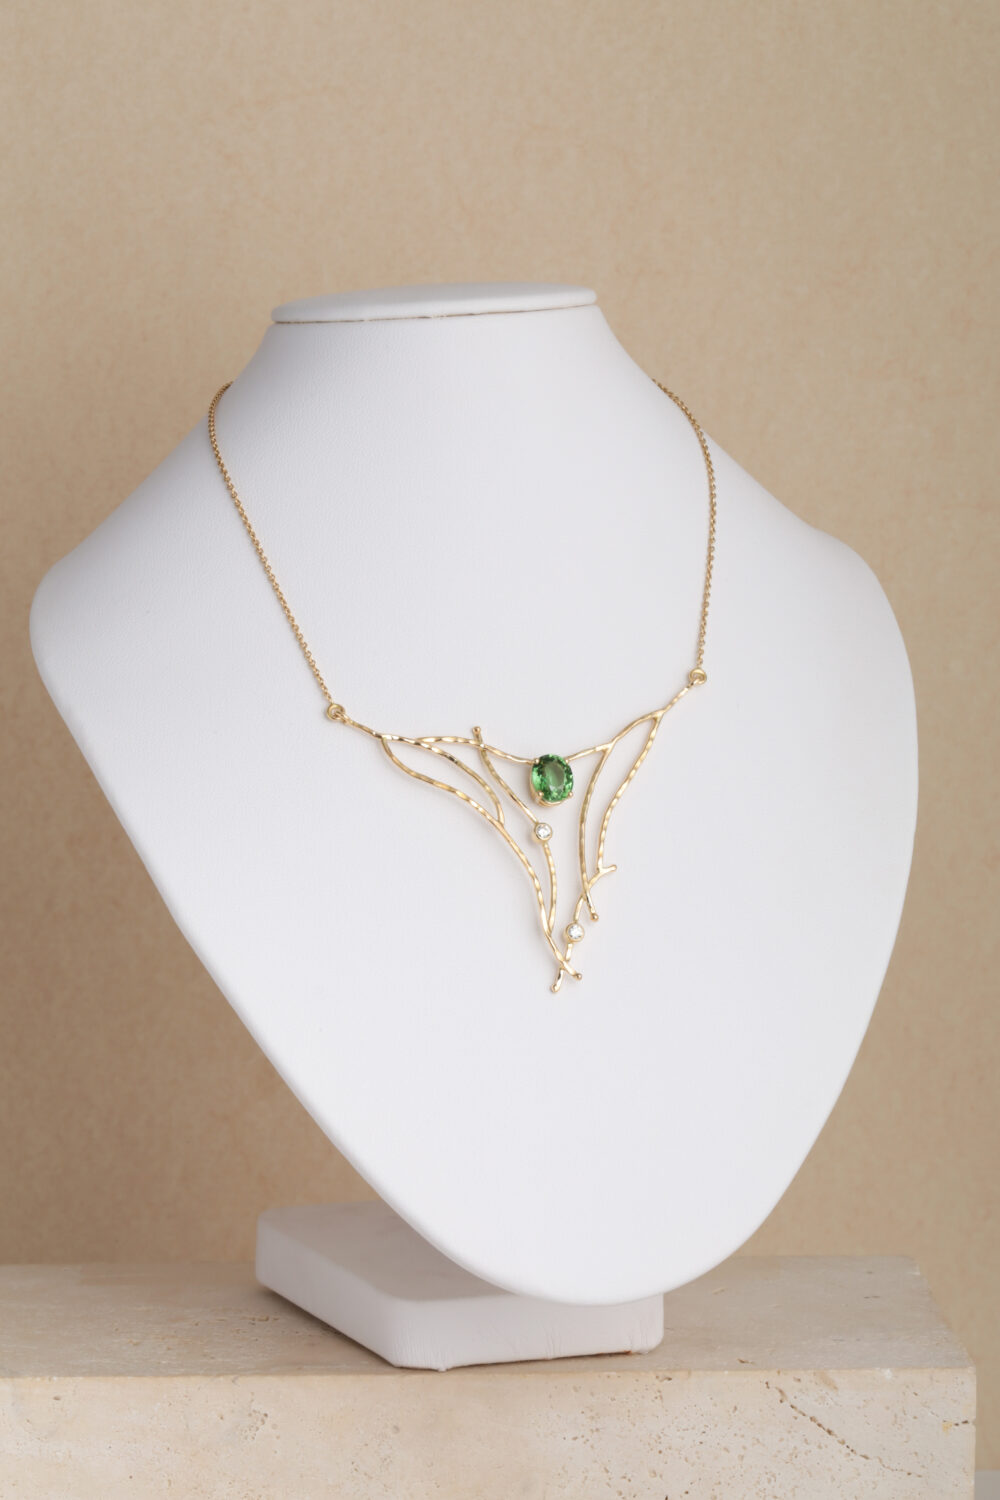 Diamond and Tourmaline necklace crafted from 18- karat gold set with an oval Tourmaline gemstone and diamonds by jewellery designer Pascale Masselis